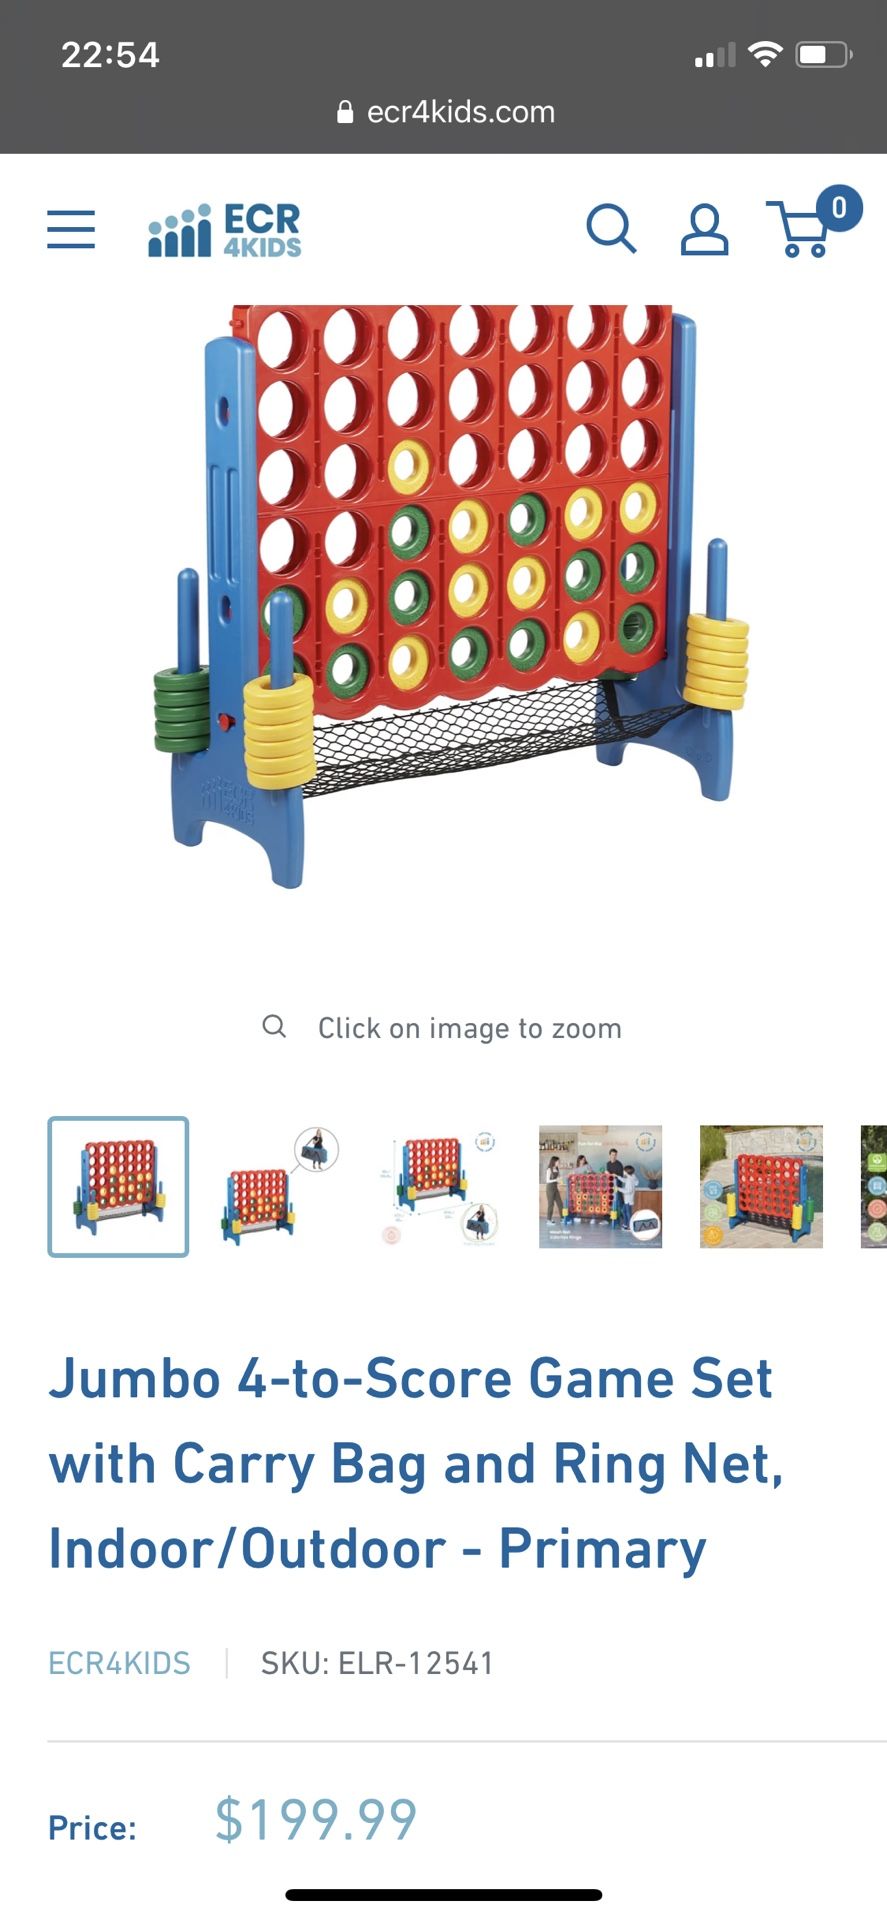 Large Connect Four